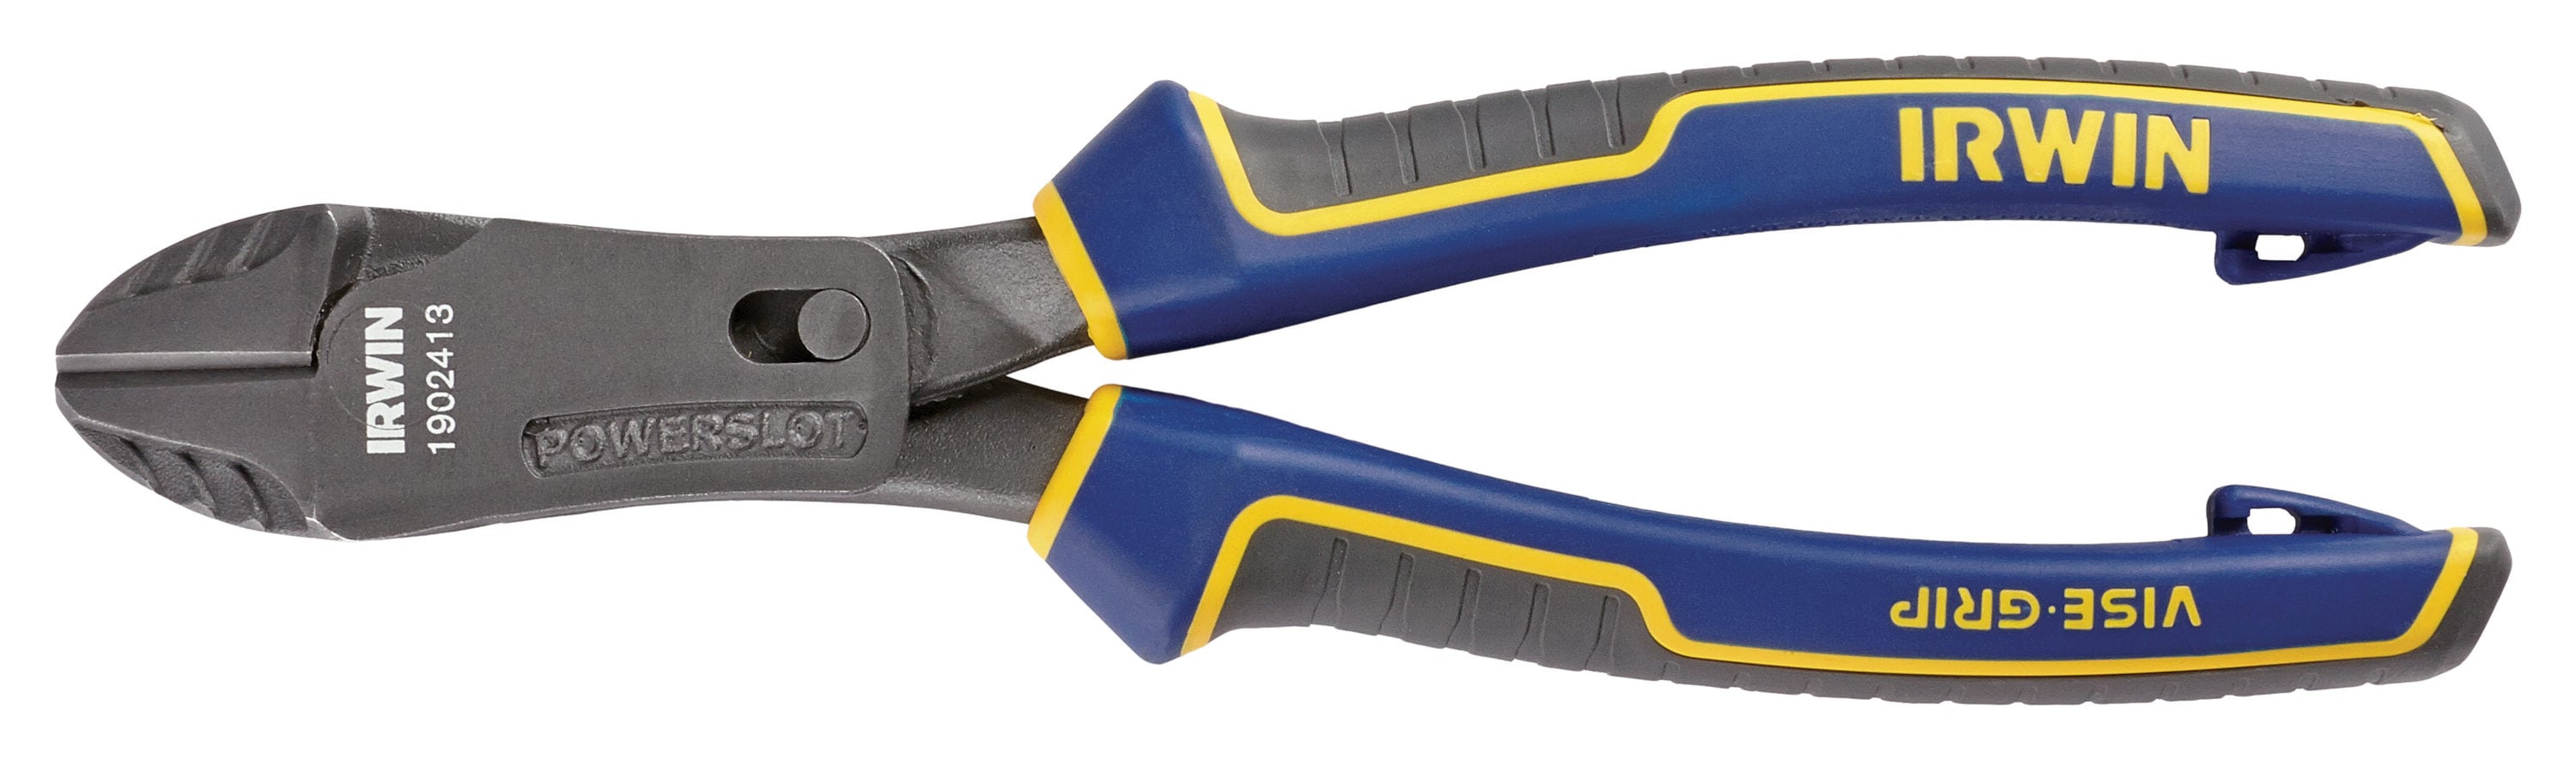 IRWIN VISE-GRIP Diagonal Cutting Pliers in the Cutting Pliers